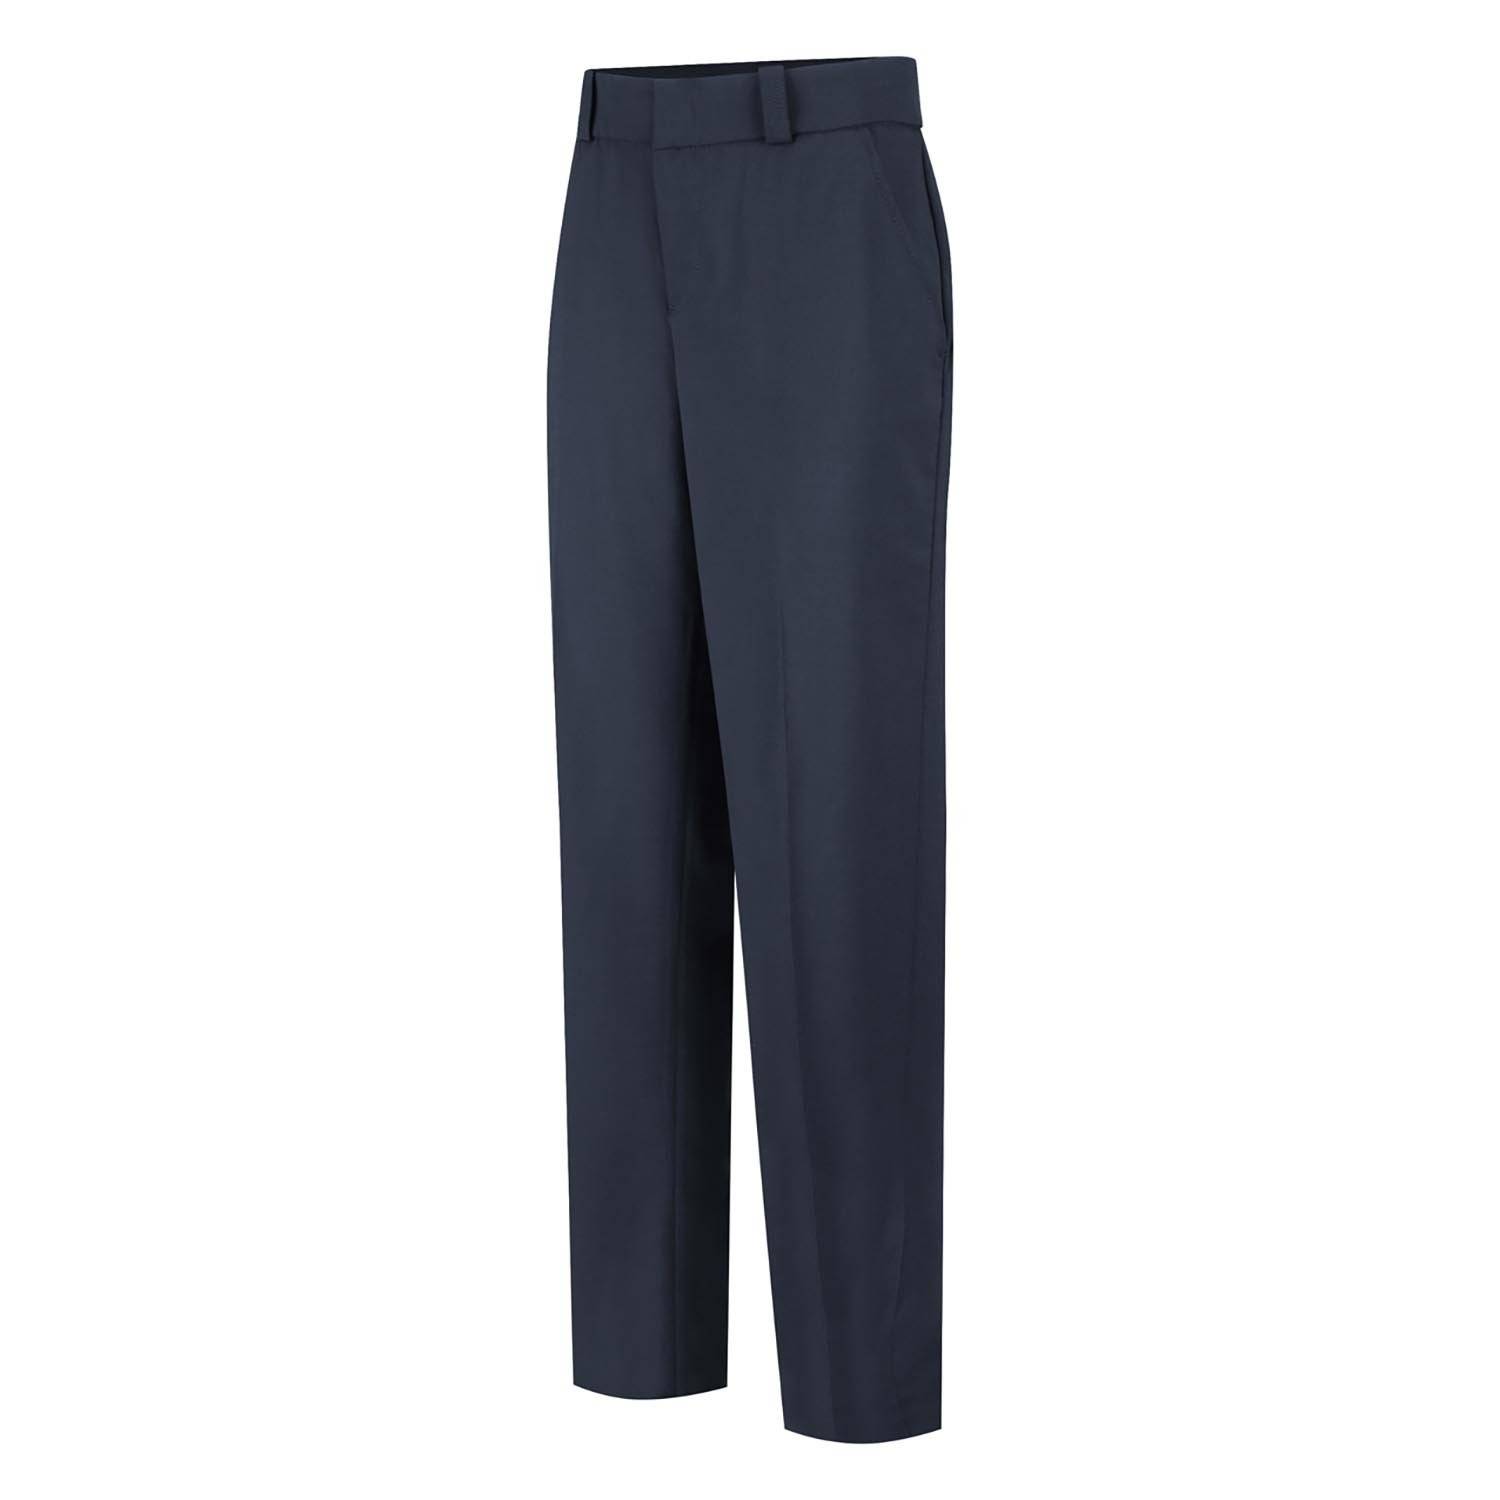 Horace Small Women's New Generation Stretch 4-Pocket Trouser